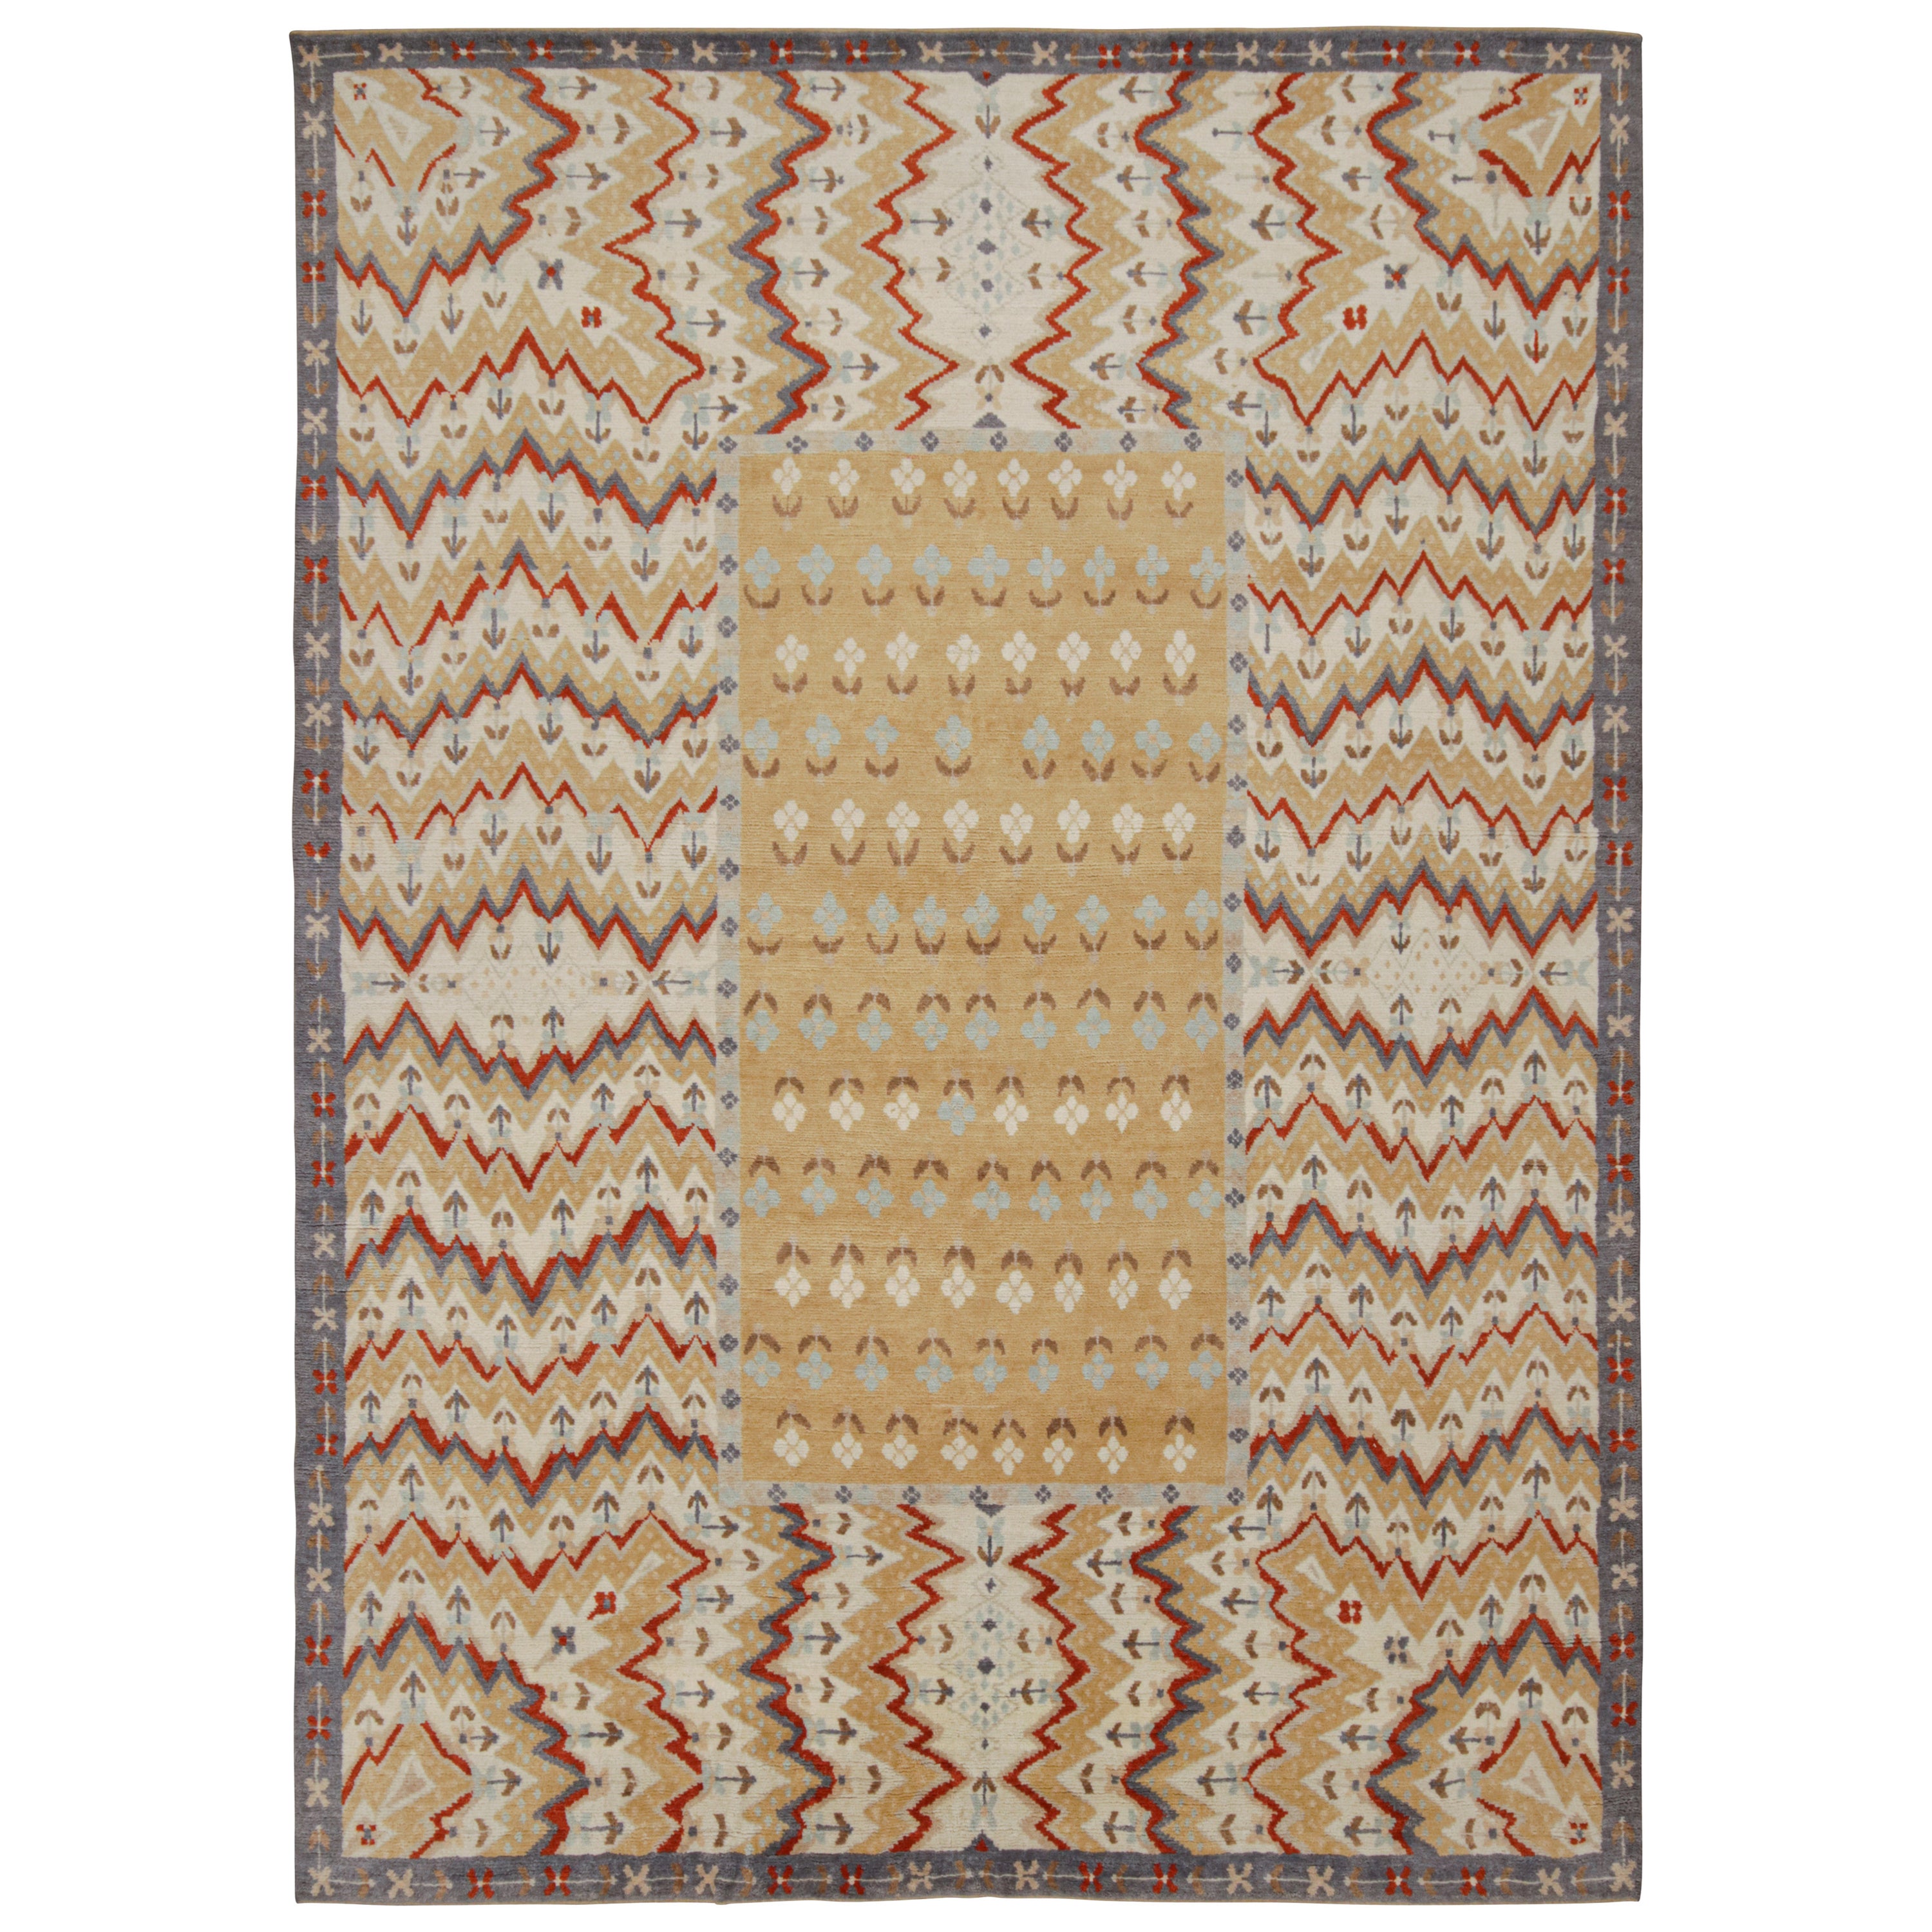 Rug & Kilim’s Tribal Style rug in Gold, Gray & Red Patterns For Sale